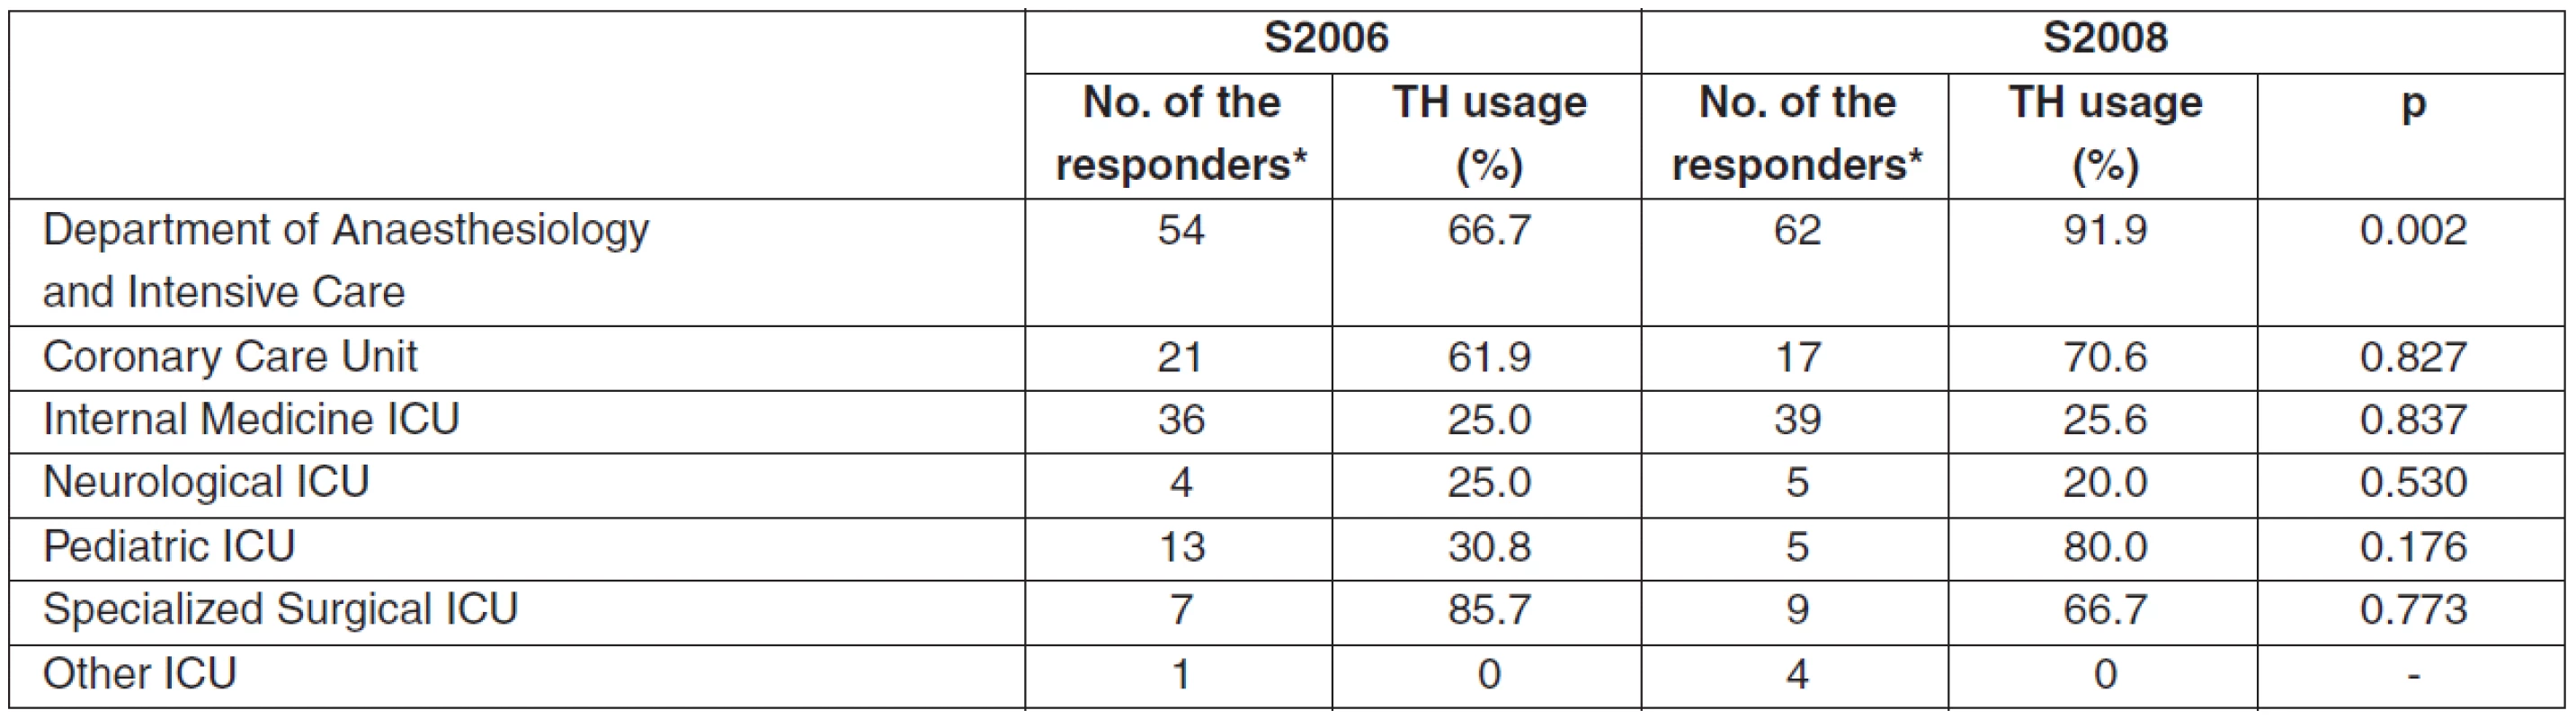 Comparison of TH usage in different types of ICUs in 2006 and 2008